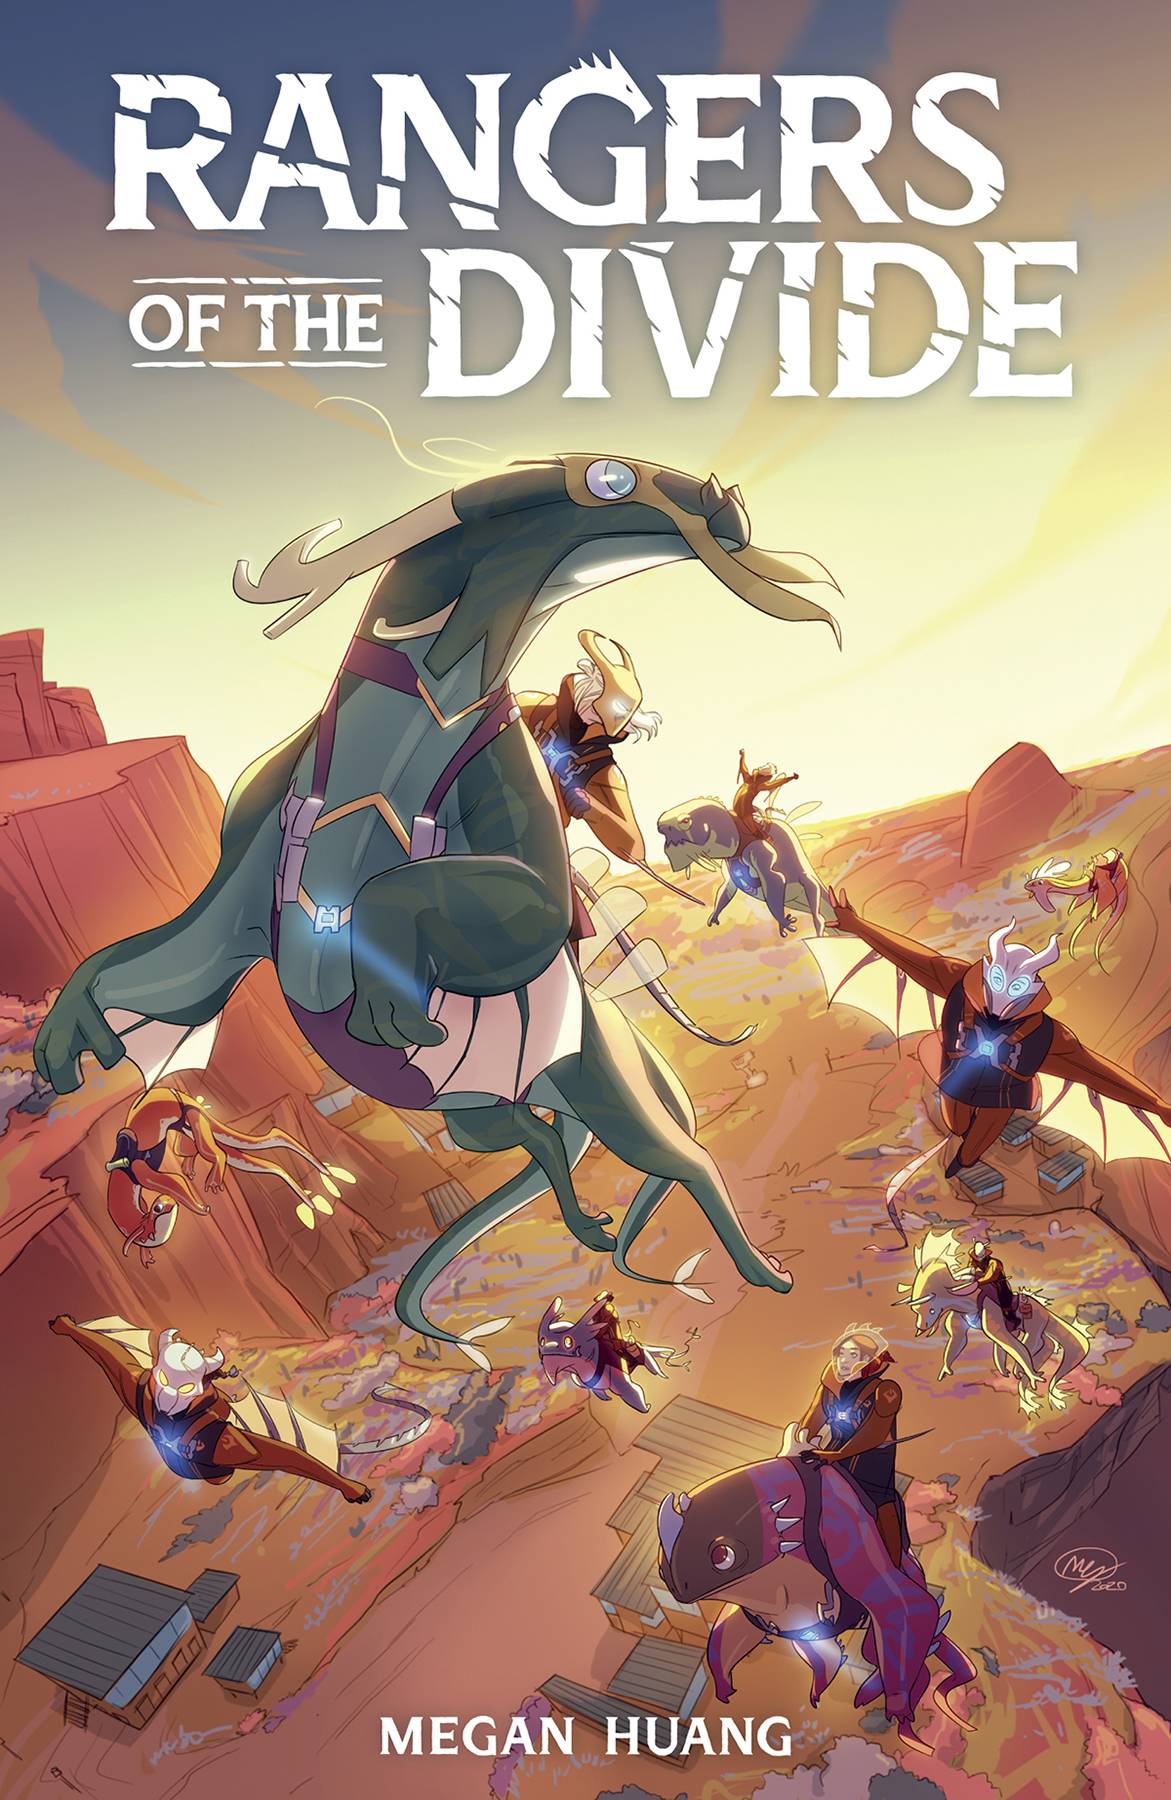 RANGERS OF THE DIVIDE TP (AUG210341) (C: 0-1-2)